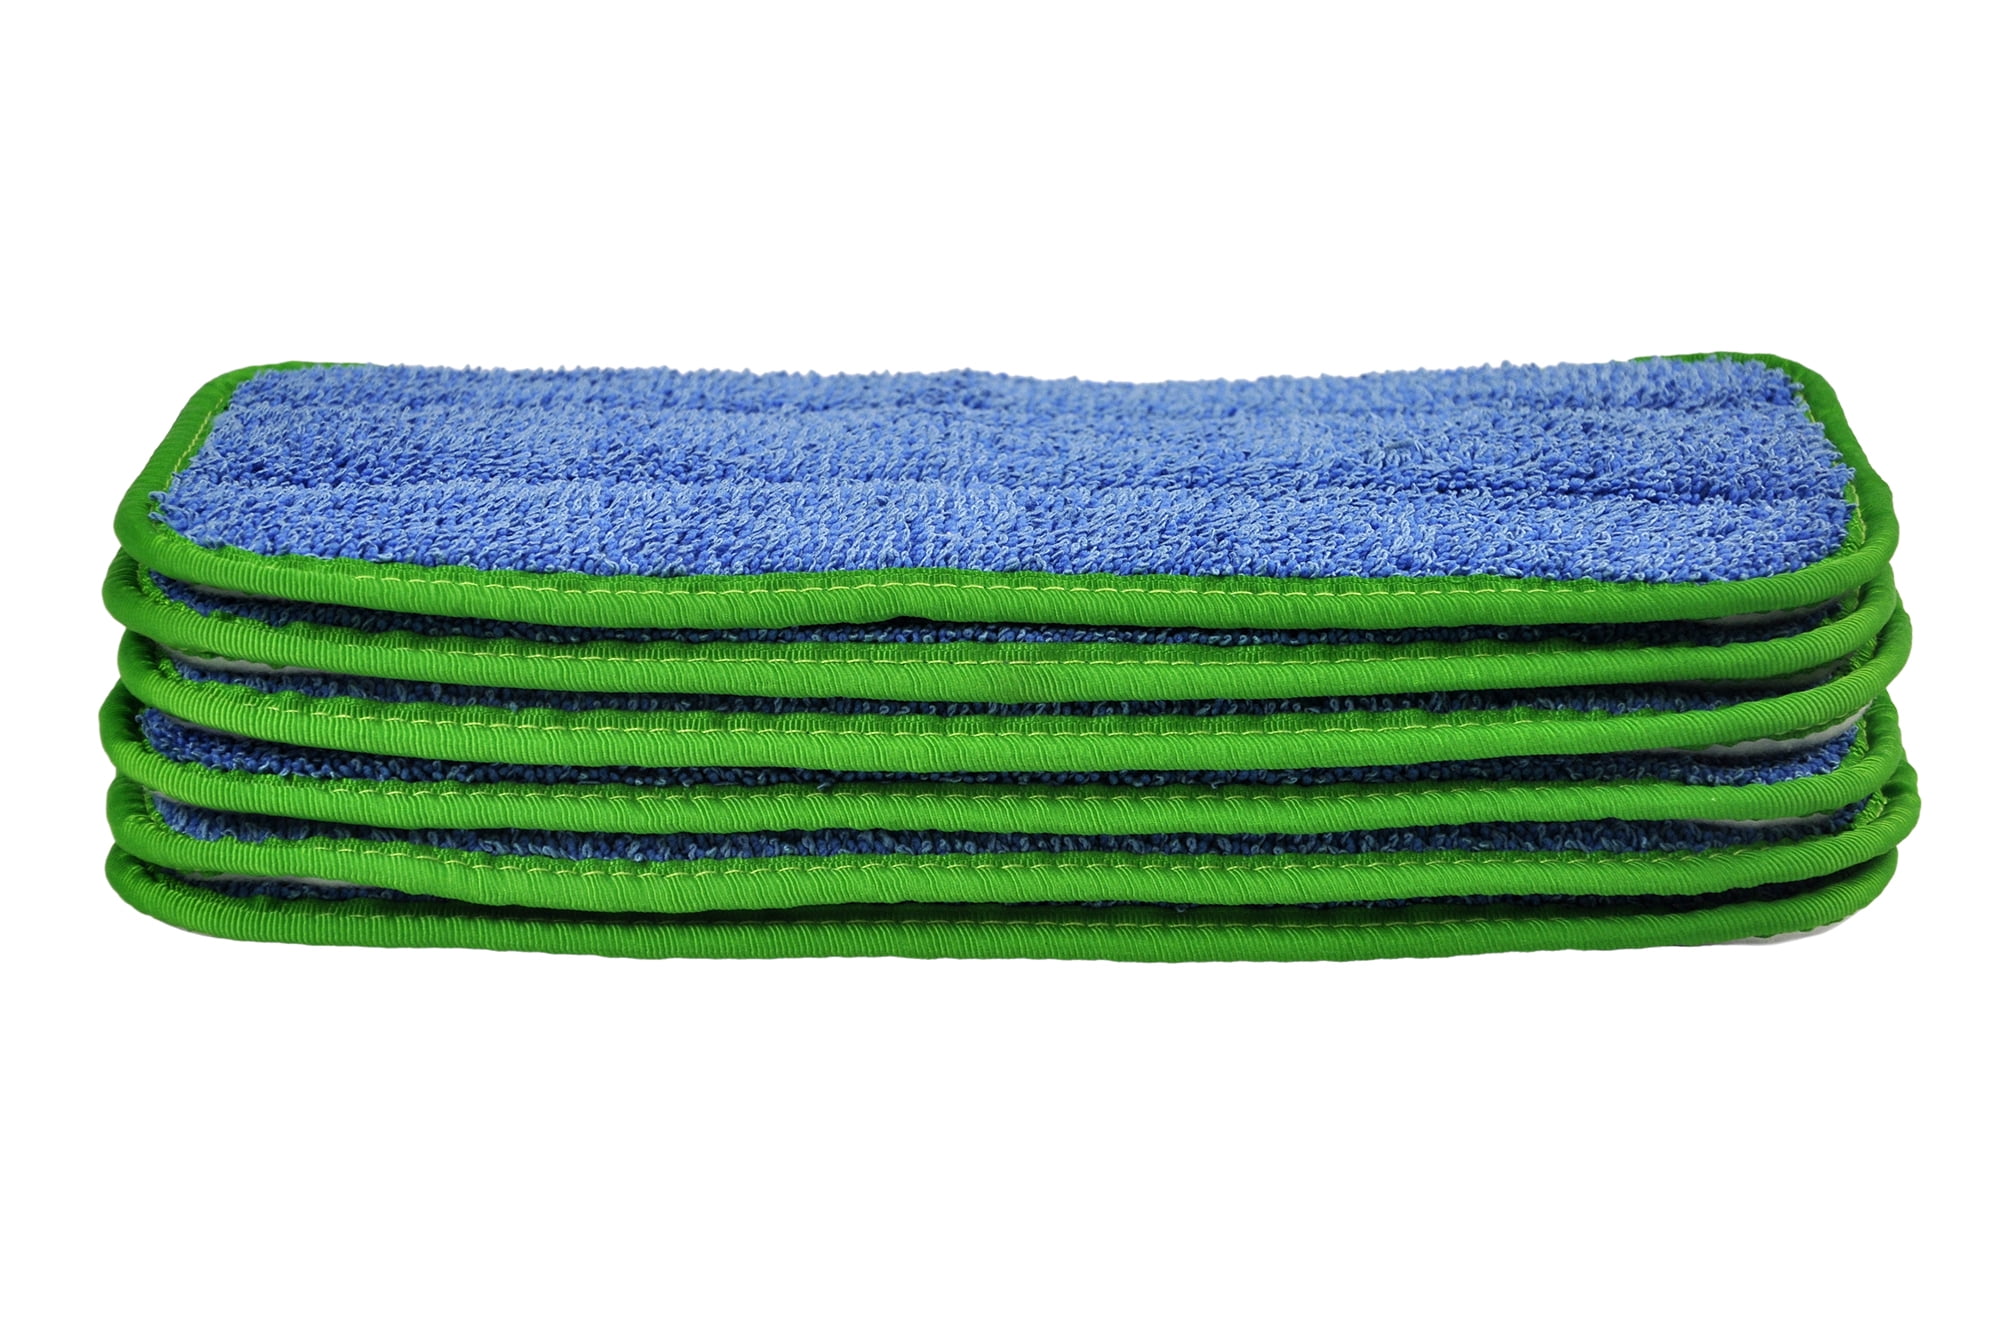 CleanAide Spot Cleaning Twist Yarn Microfiber Mop Pad with Scrubber 18 Inches Green 6 Pack 